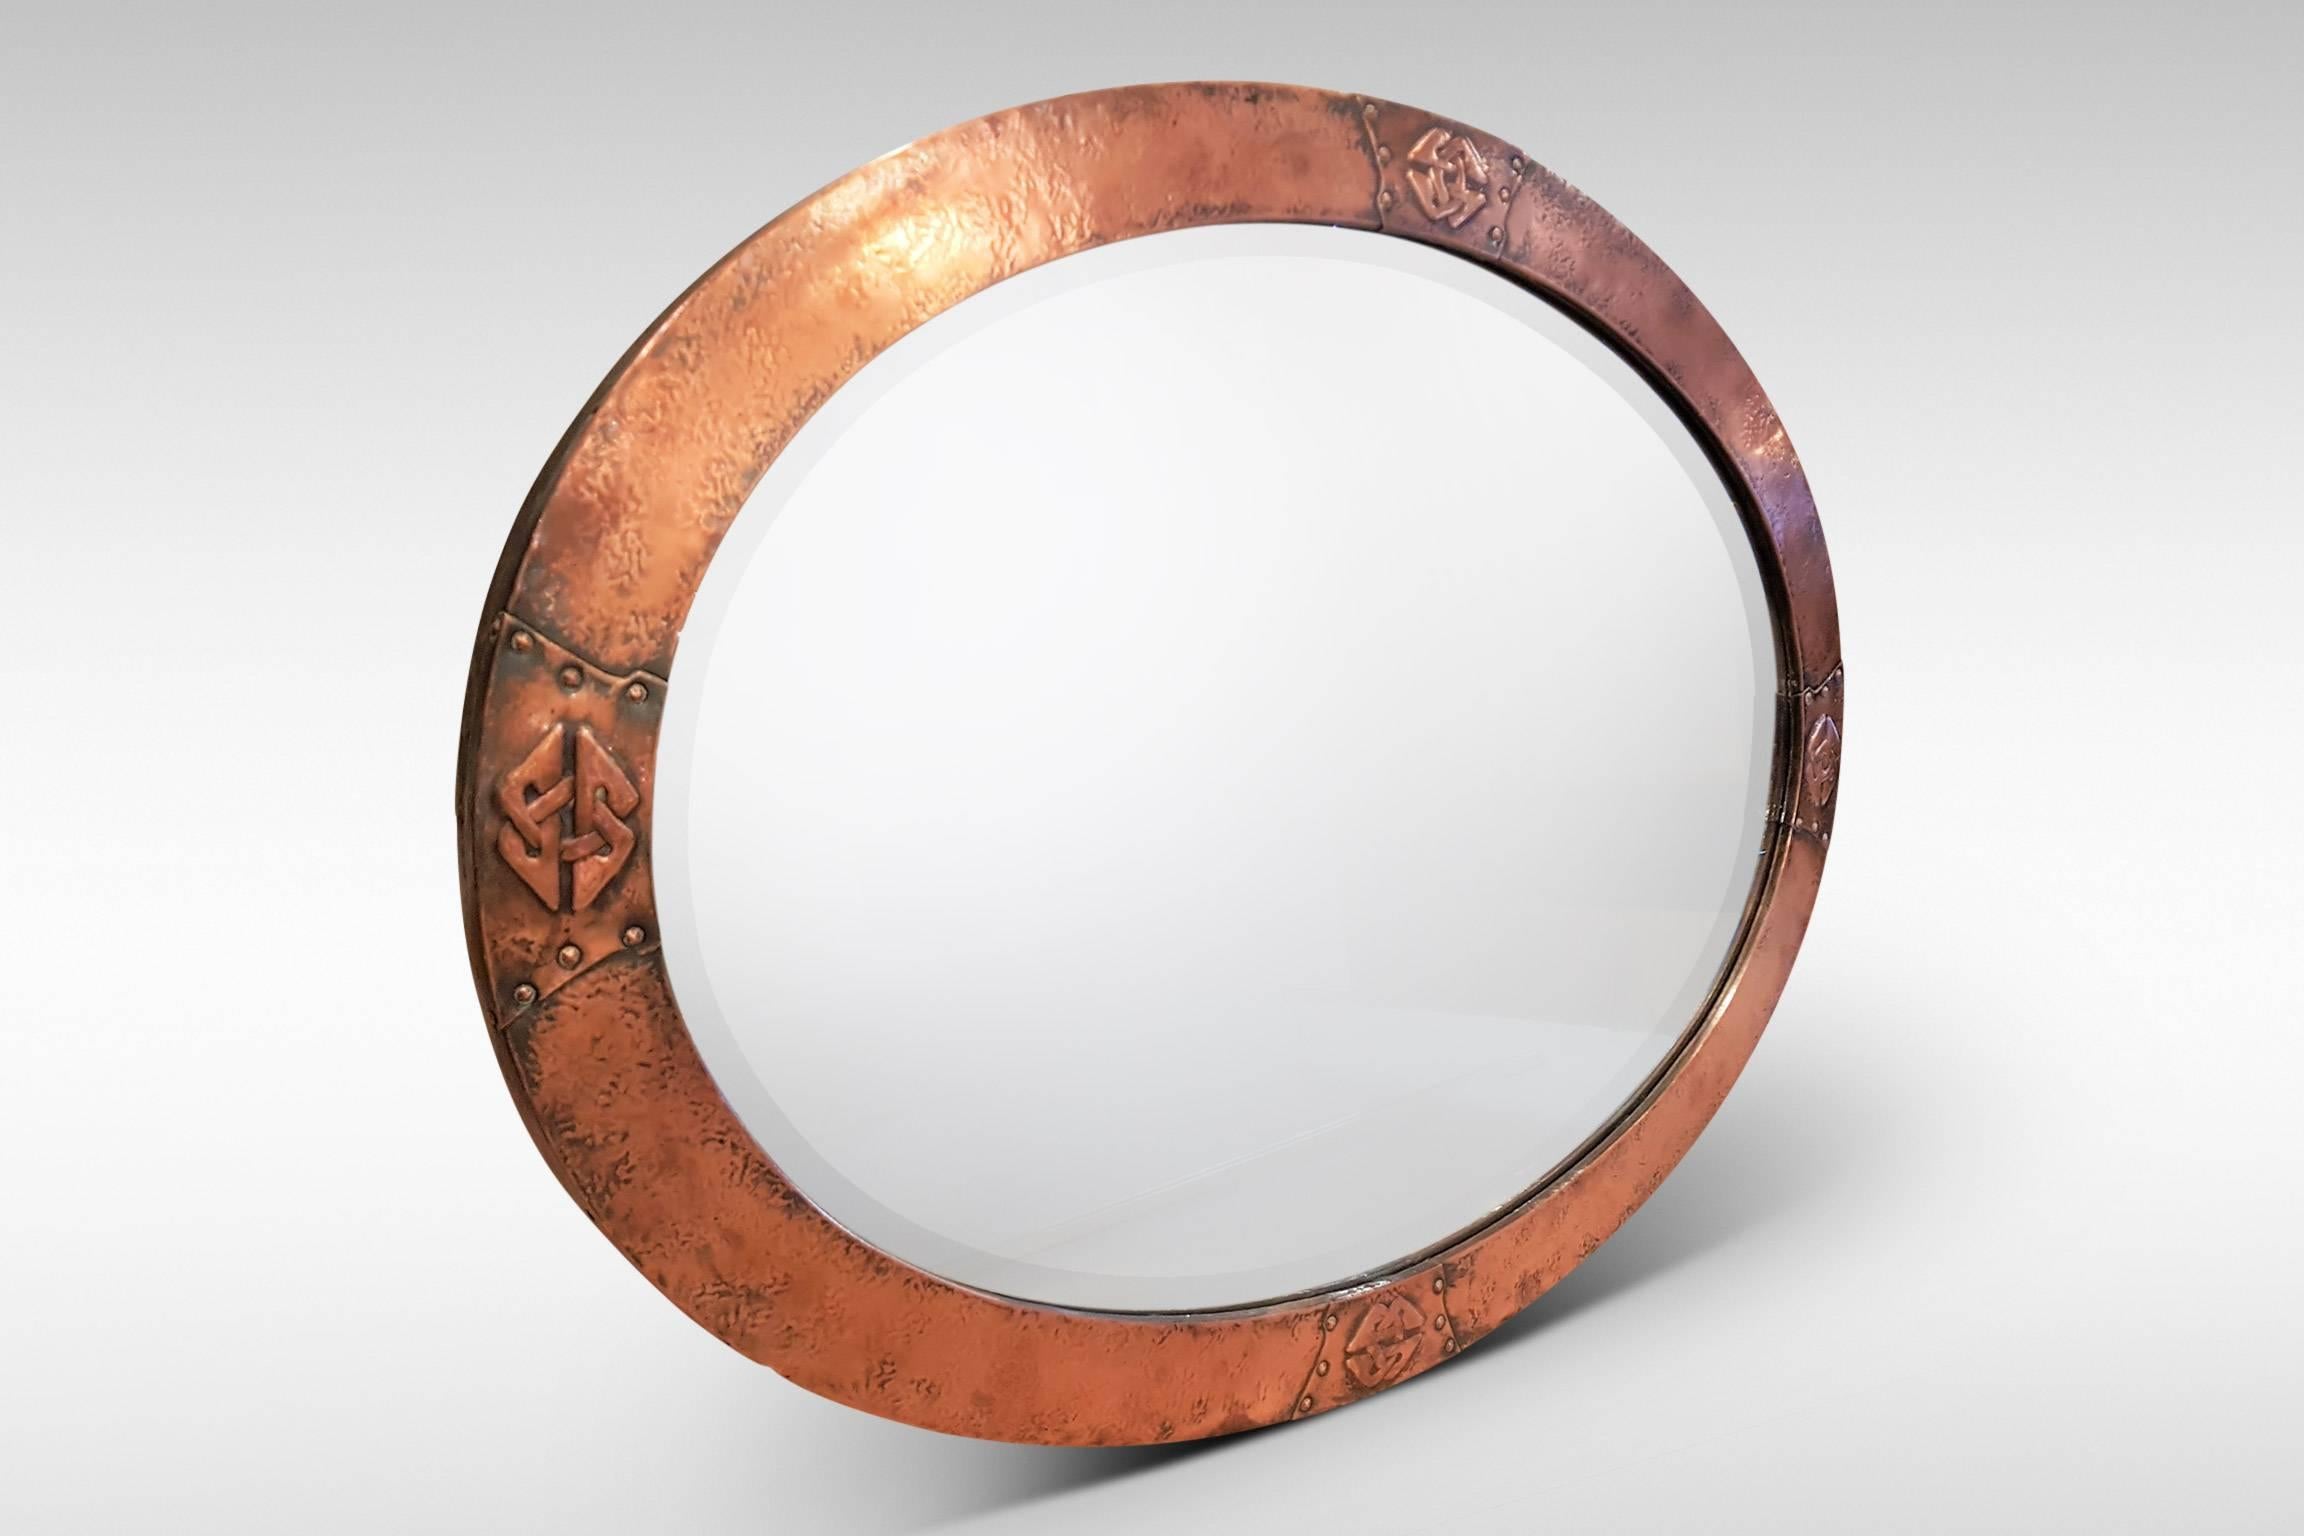 British Arts & Crafts Movement Copper Oval Mirror with Celtic Detailing